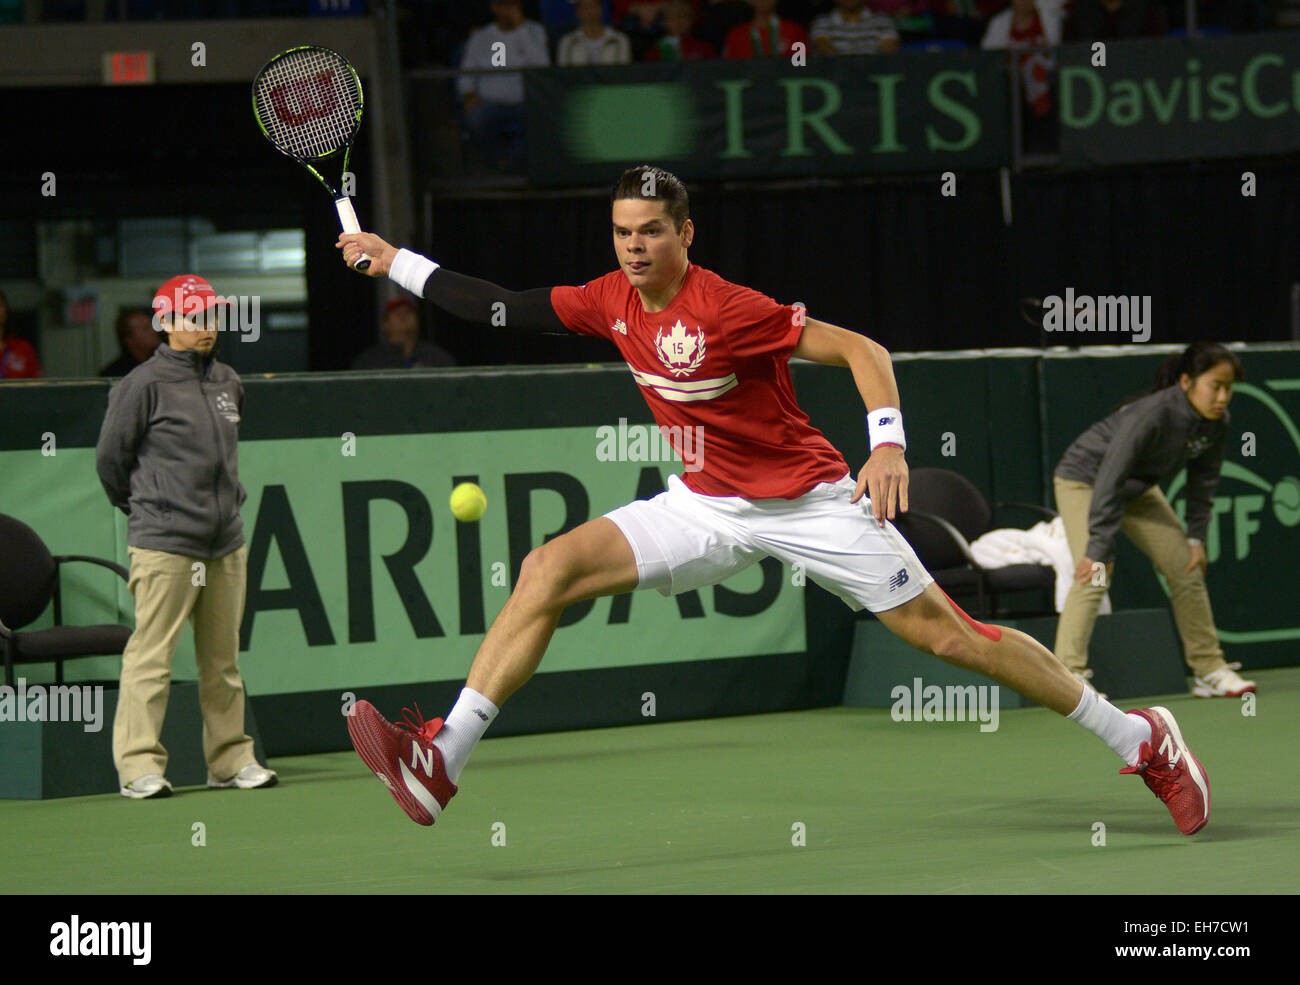 Vancouver, Canada. 8th Mar, 2015. Canada's Milos Raonic returns the ball to Japan's Kei Nishikori during their match at Davis Cup tennis tournament in Vancouver, Canada, March 8, 2015. Nishikori defeated Raonic 3-2 during final day of best-of-five World Group showdown. Credit:  Sergei Bachlakov/Xinhua/Alamy Live News Stock Photo